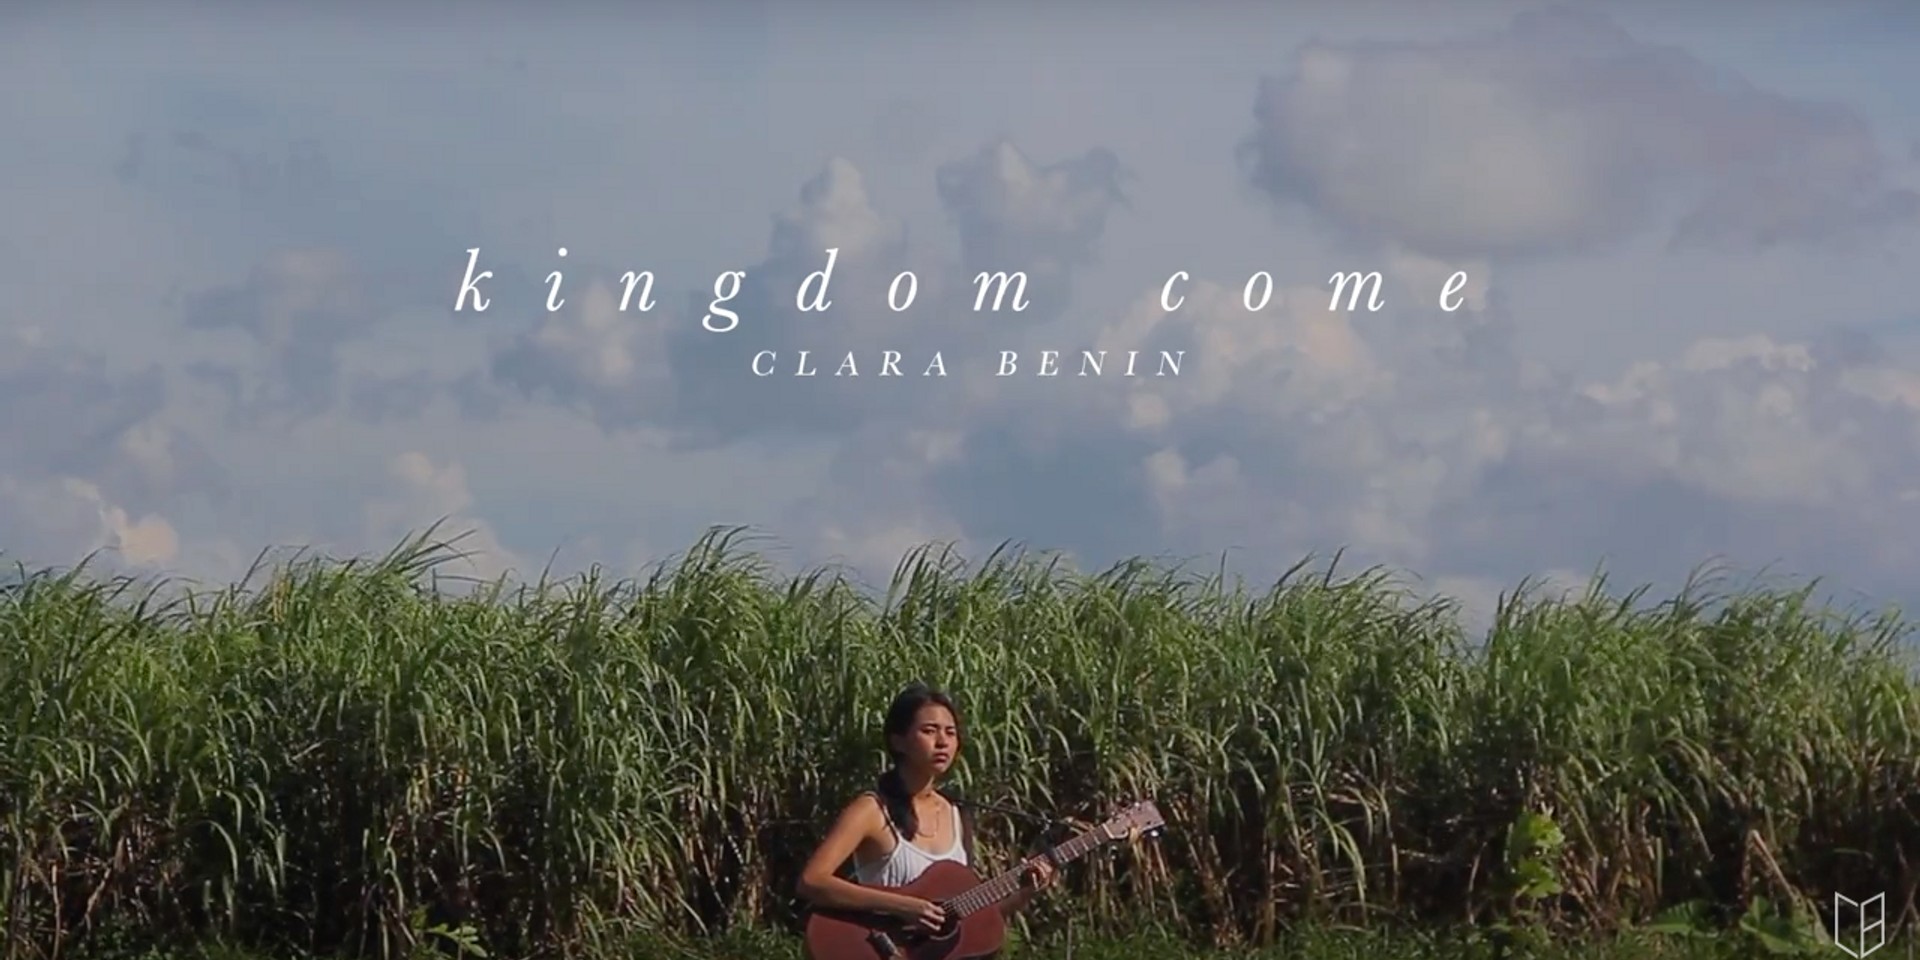 WATCH: Clara Benin opens 2017 with new lyric video for "Kingdom Come"